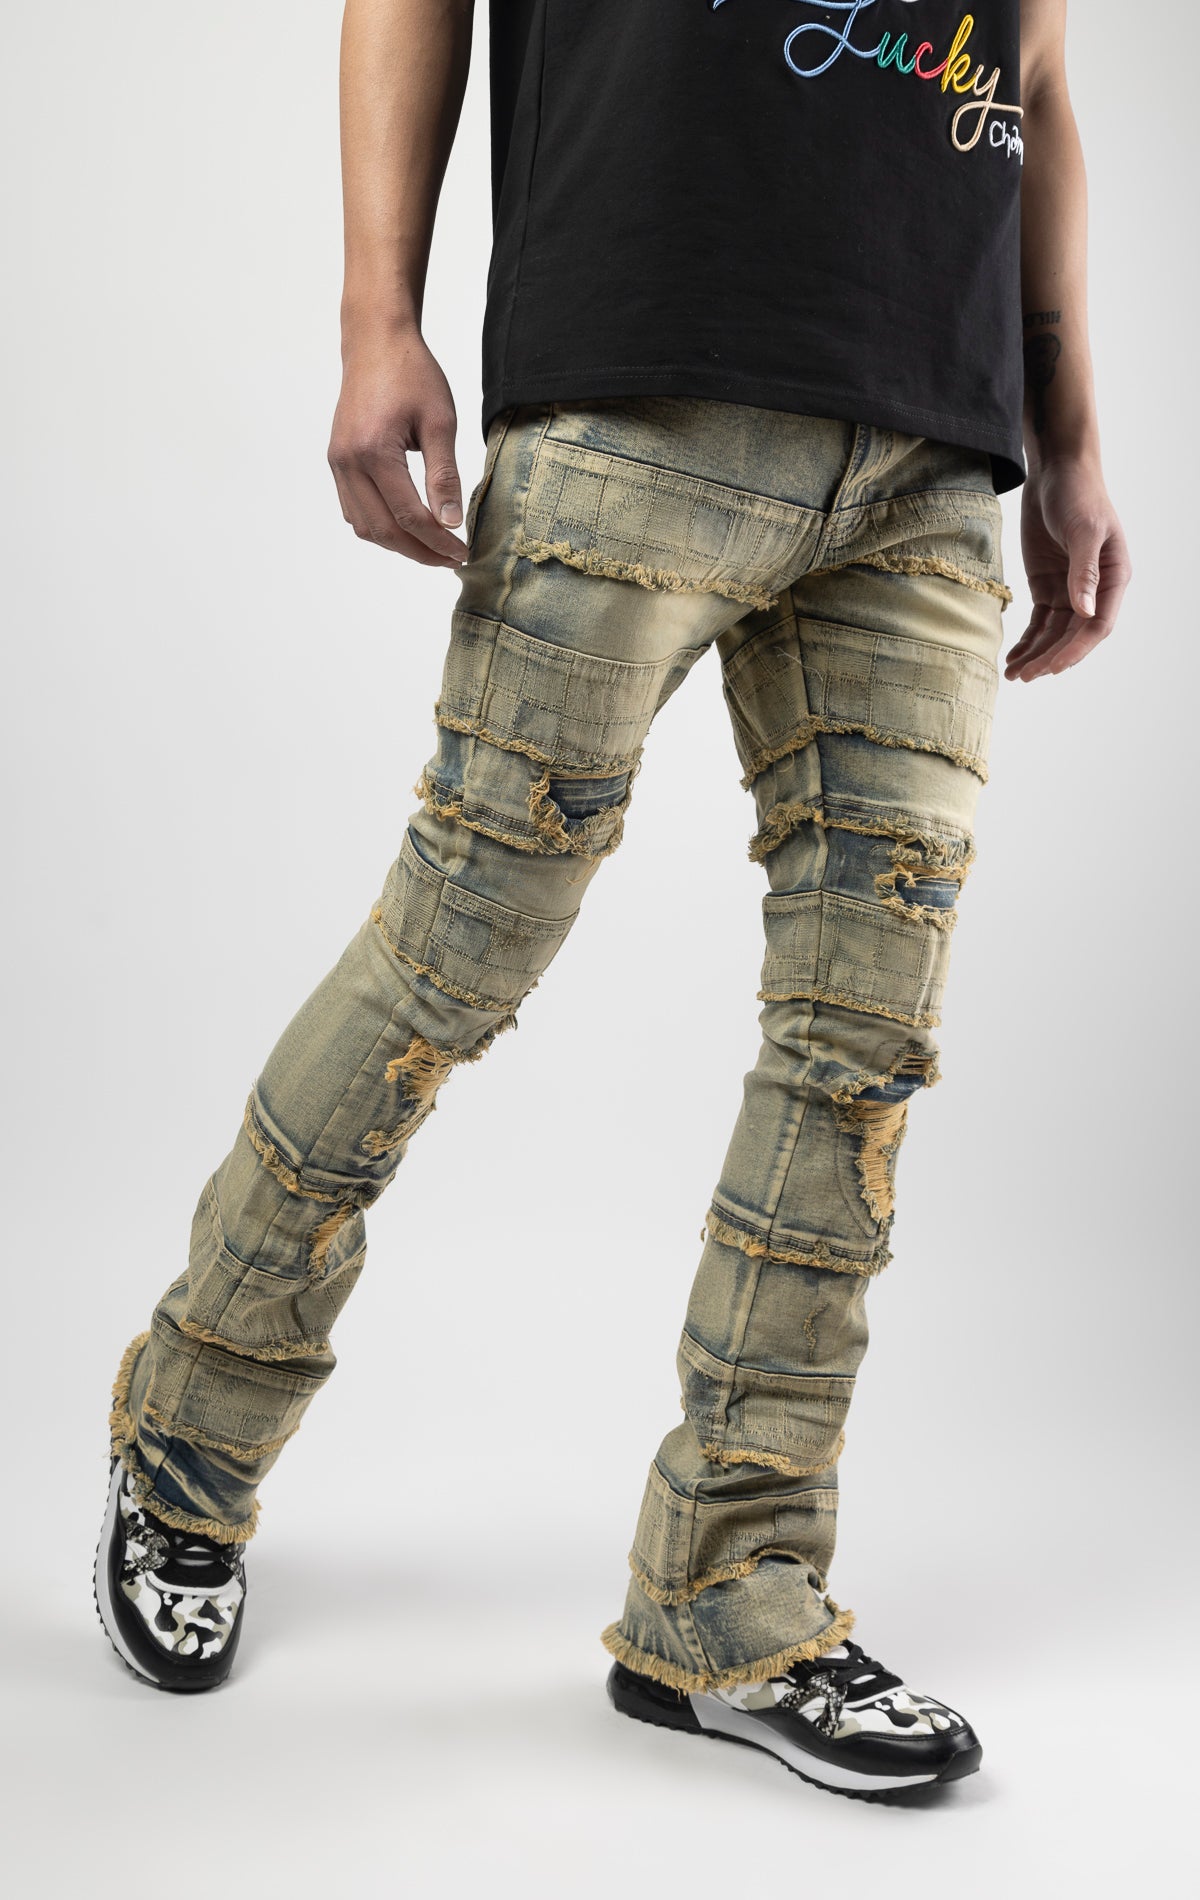 Dirt wash iconic stacked jeans crafted from high-quality, durable denim fabric consisting of 98% cotton and 2% spandex with a semi flare silhouette and a length of 35"-37". Featuring a distinctive ripped and repair design with pocket patches and a multi-tone dye throughout, these urban-inspired pants are true to size